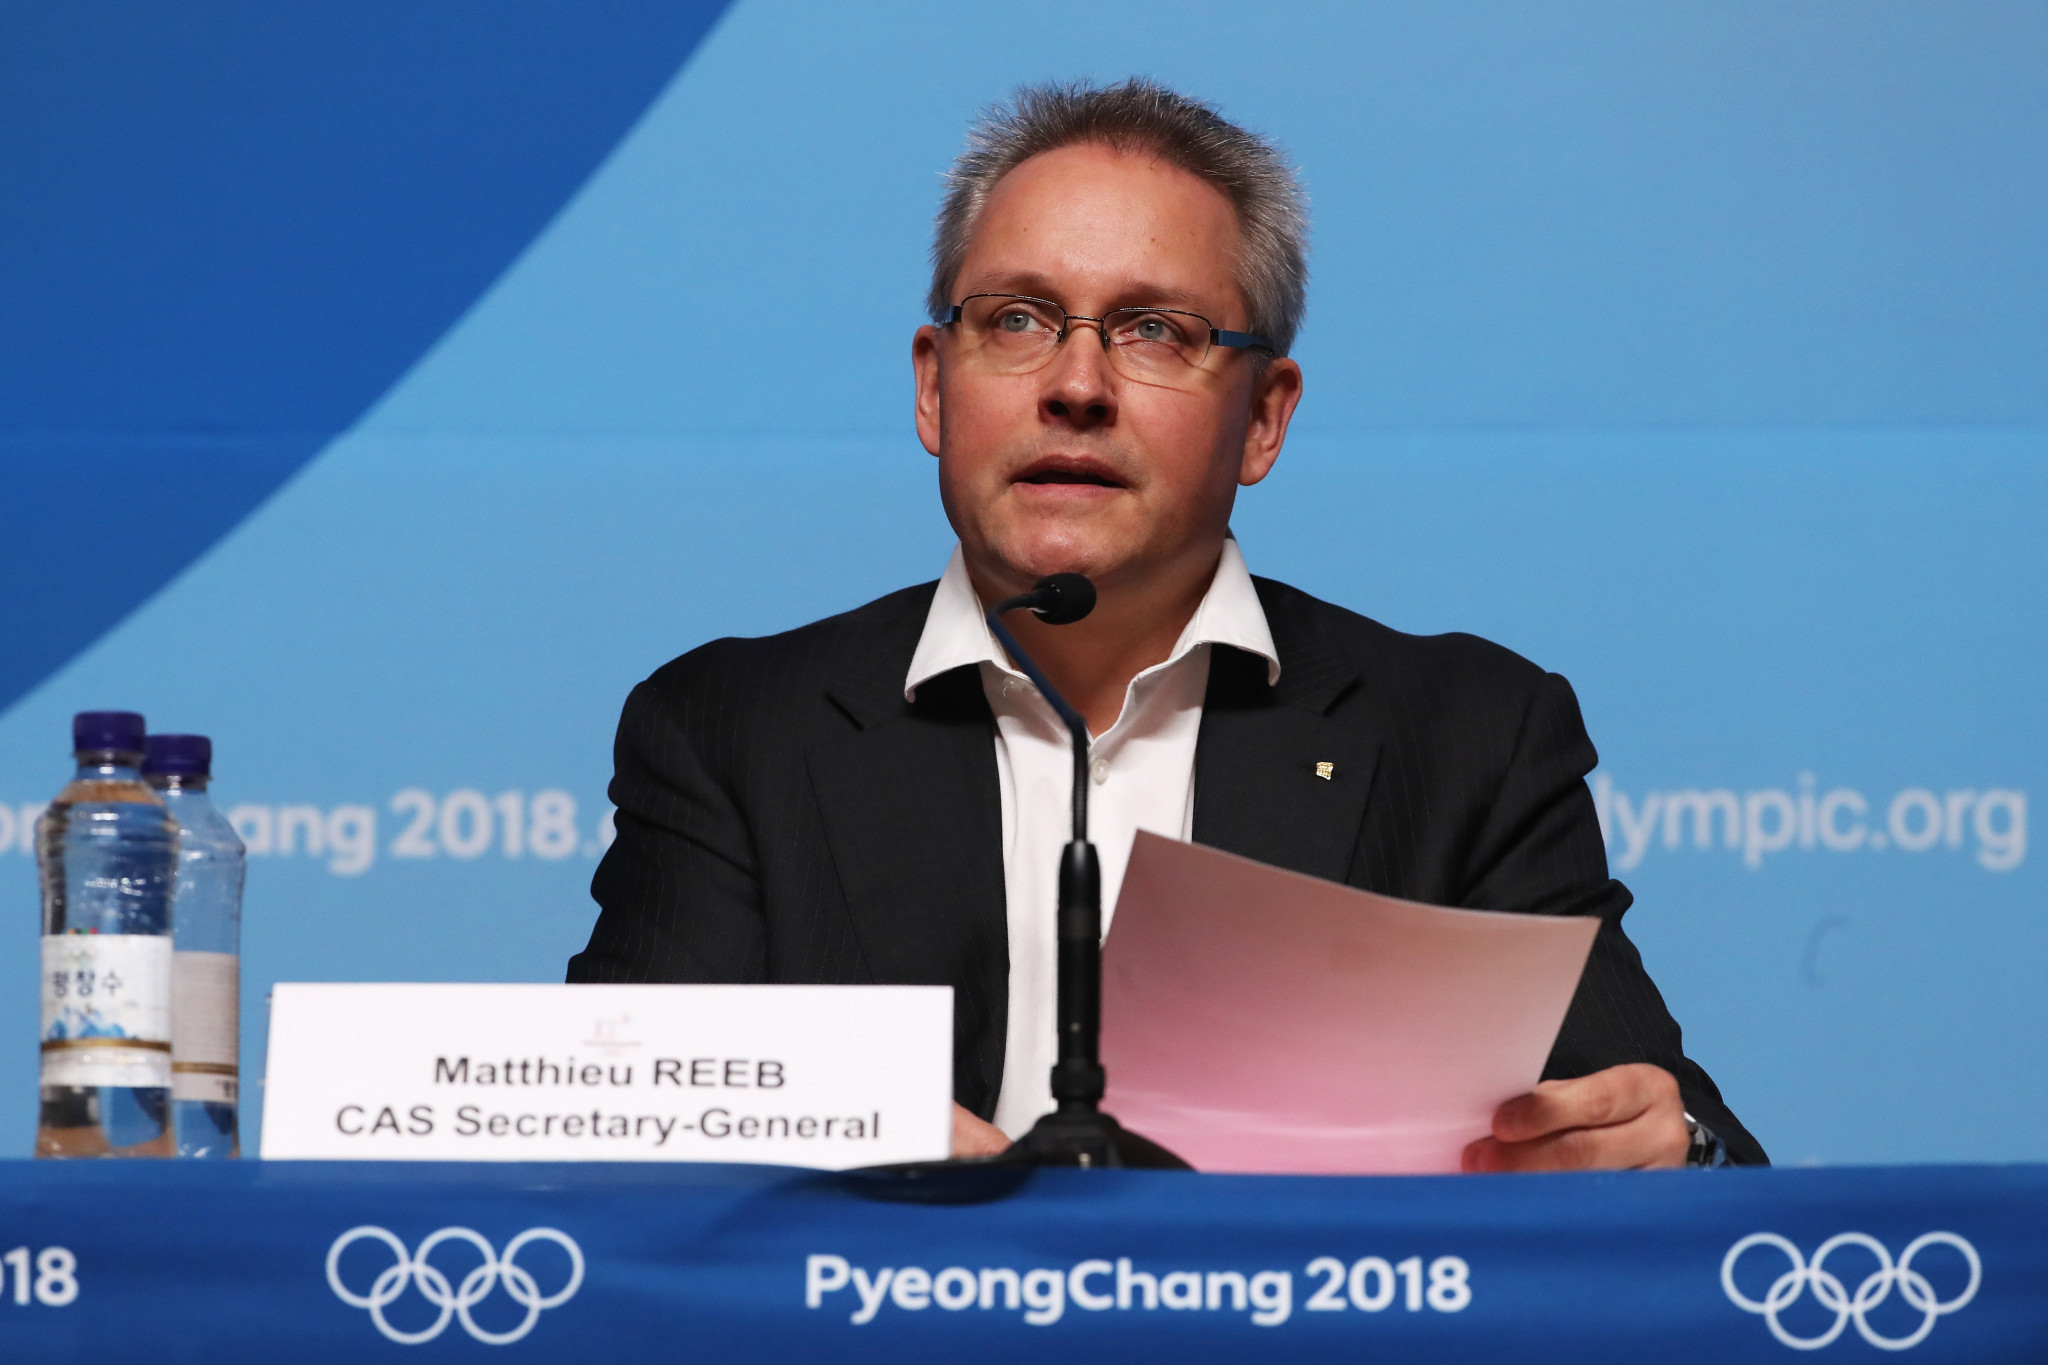 The Court of Arbitration for Sport, whose secretary general Matthieu Reeb is pictured, yesterday dismissed the appeals of all 45 Russian athletes hoping to be cleared to compete at Pyeongchang 2018 ©Getty Images